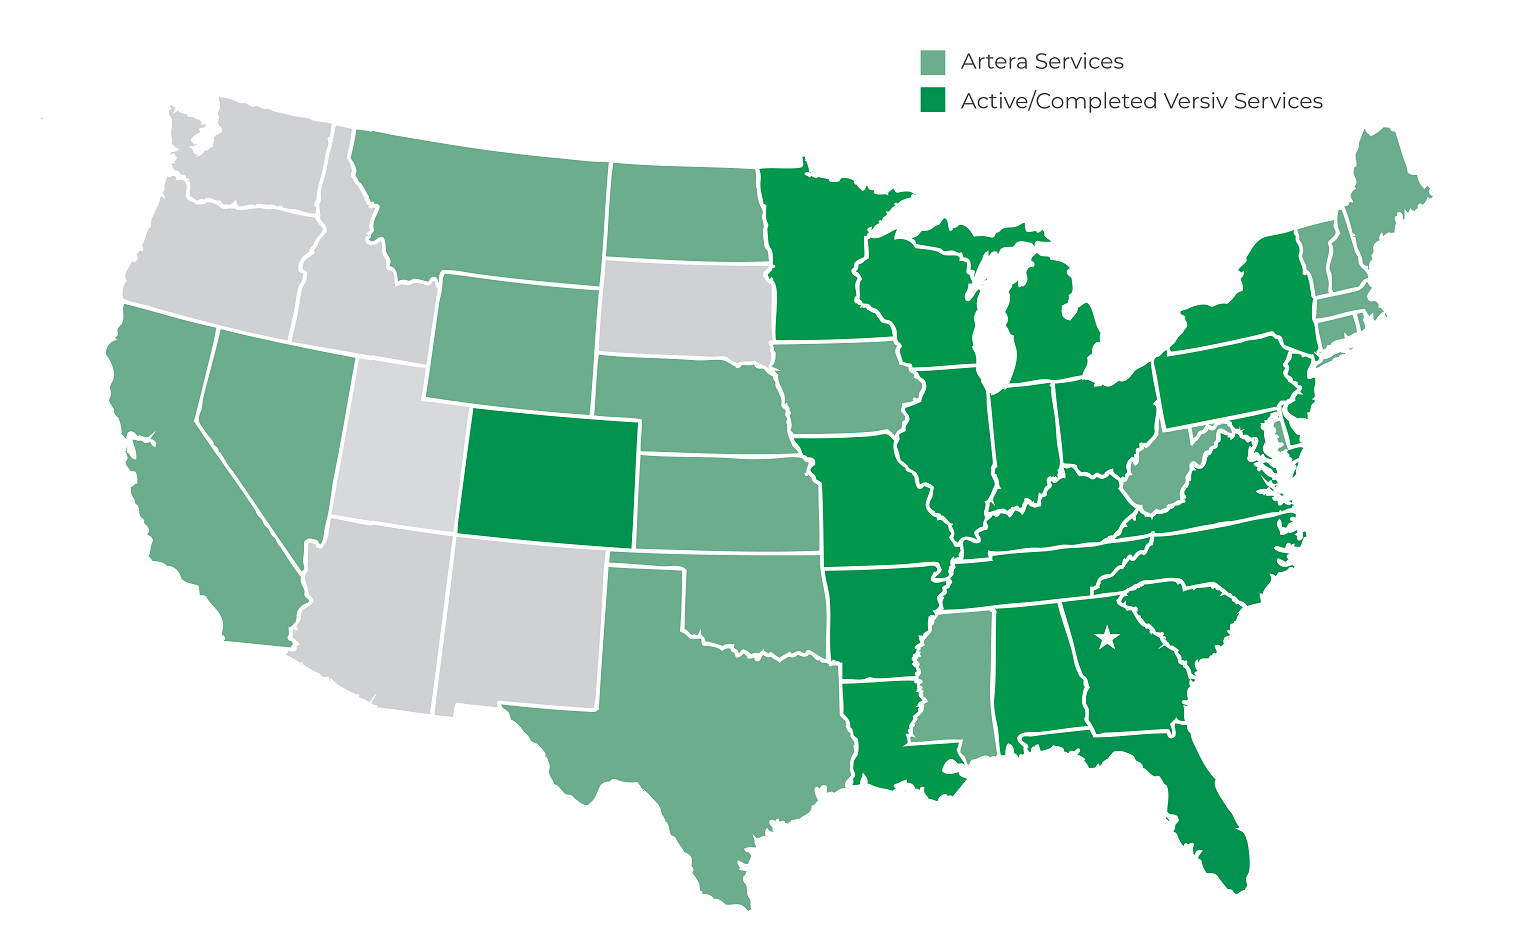 Versiv Service Map. Artera Services are in light green. Active/Completed Versiv Services in dark green.